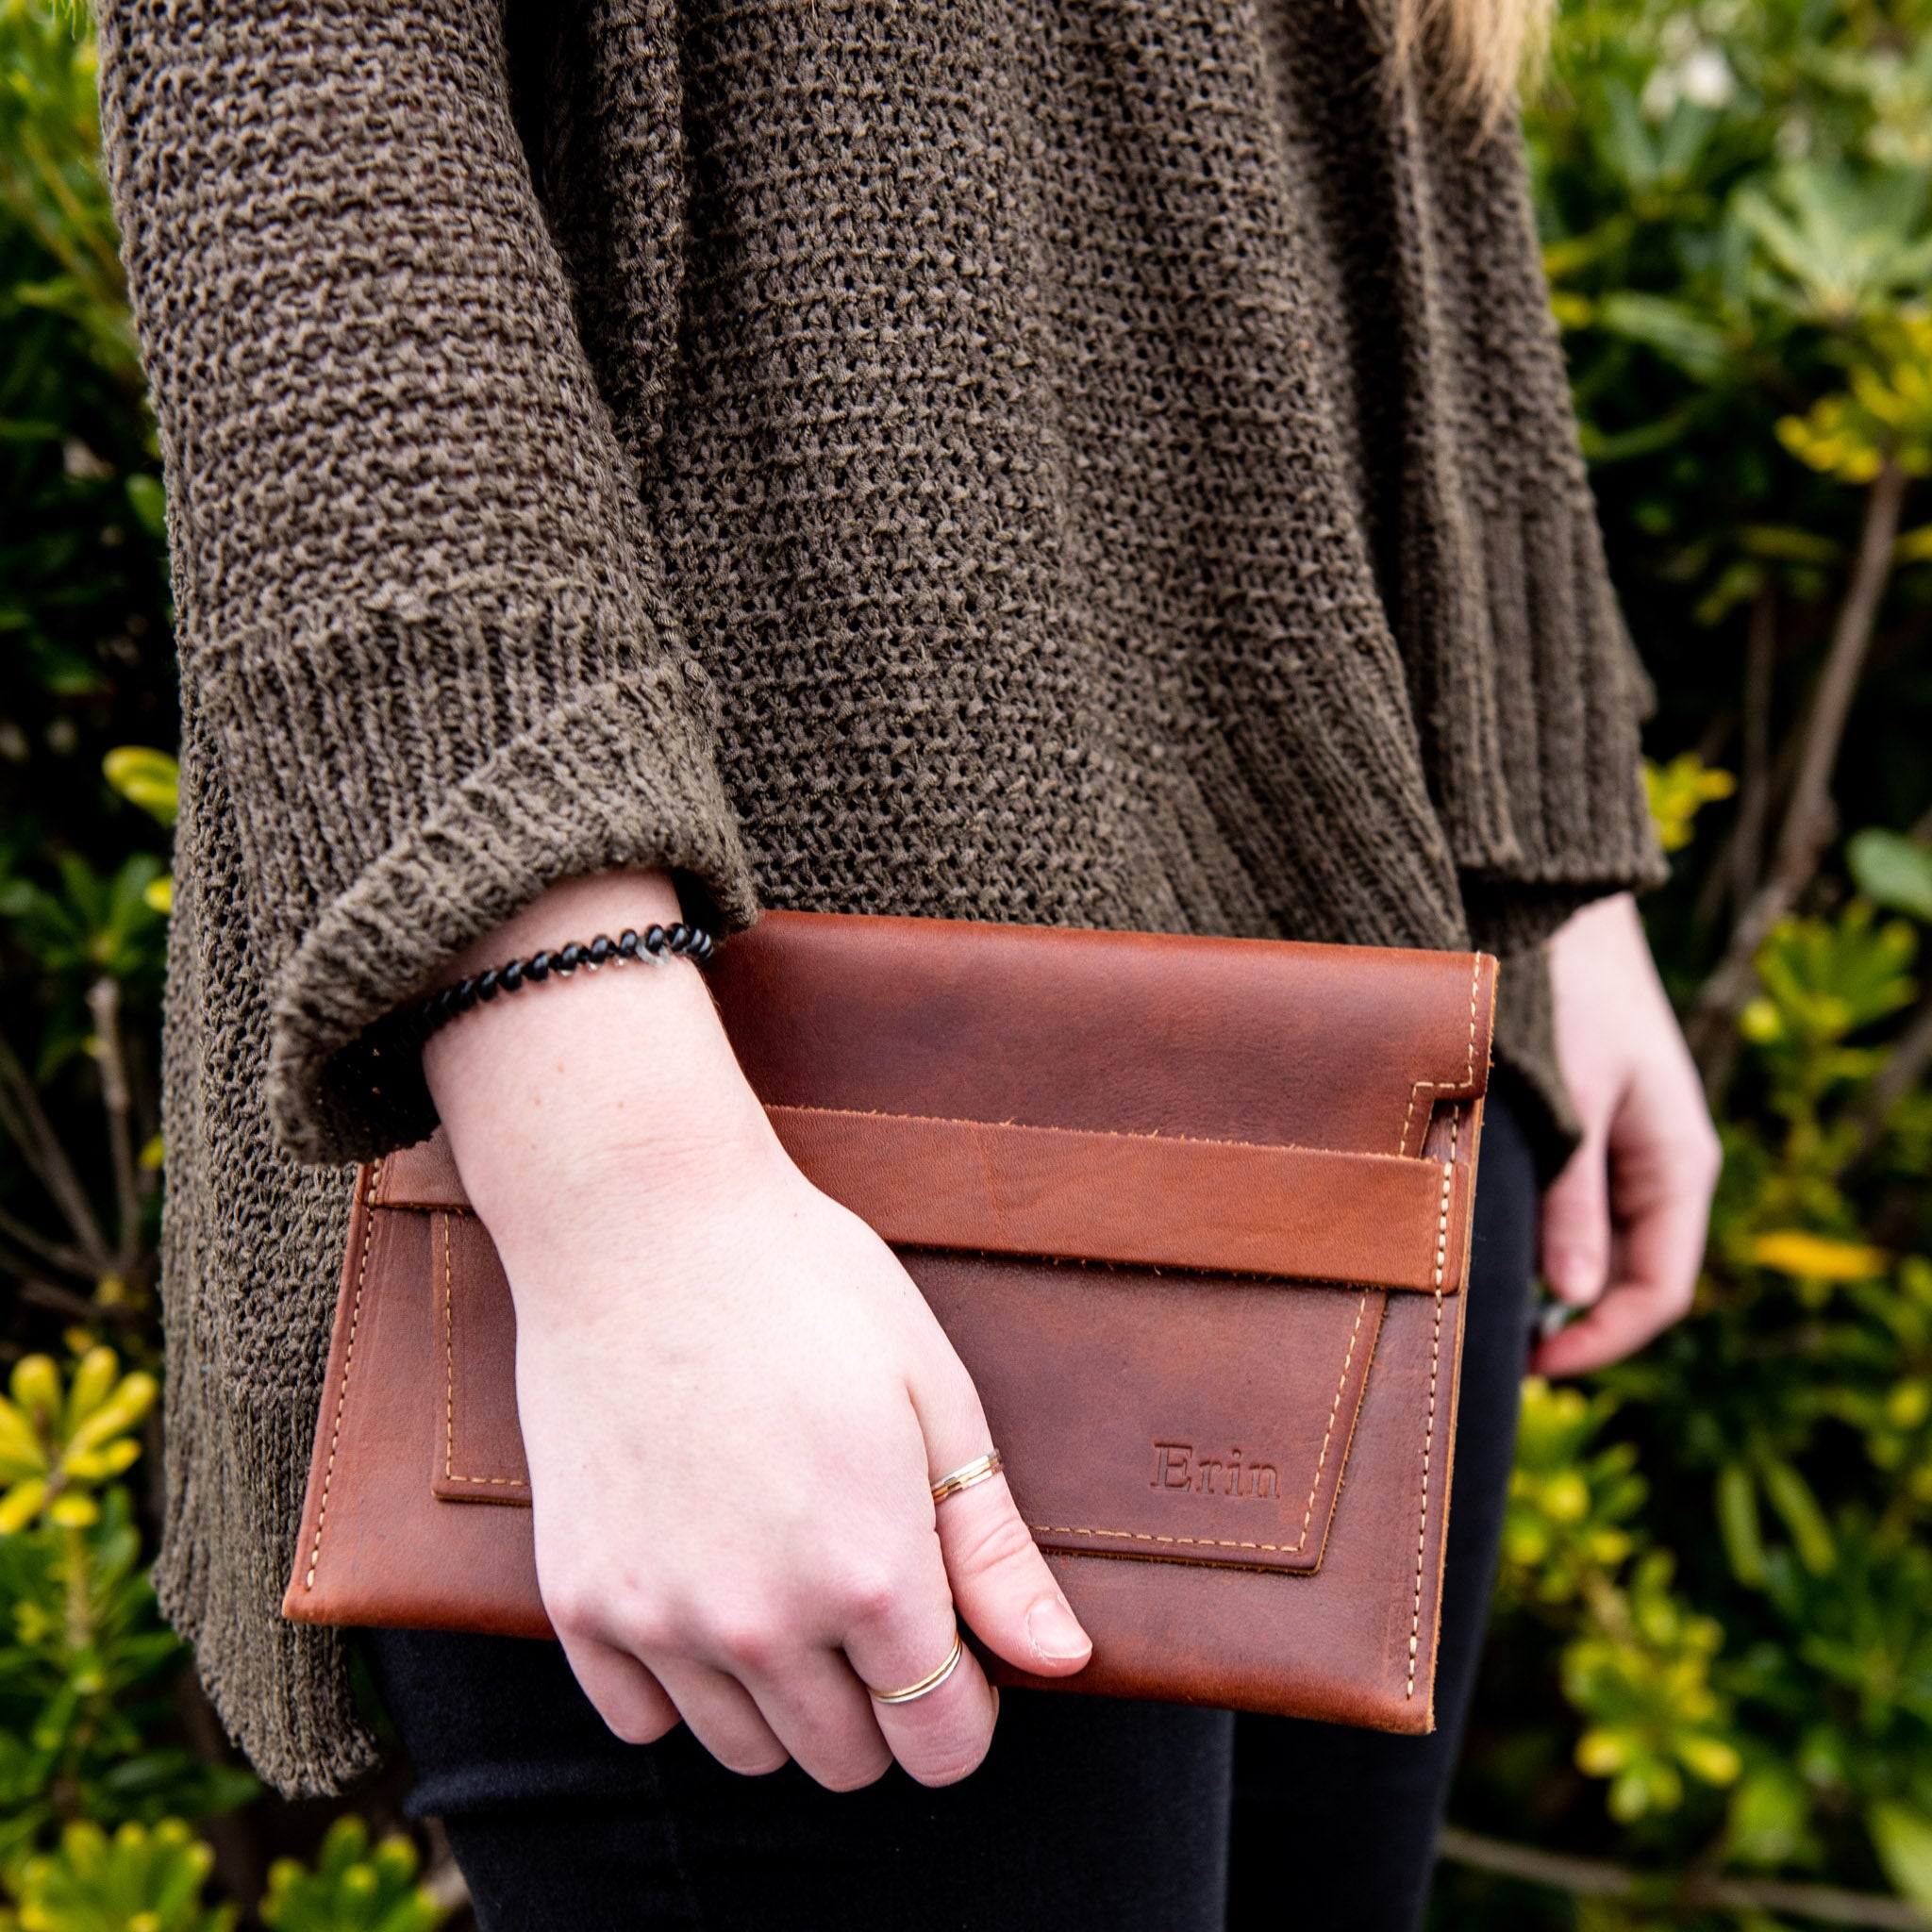 Personalized Fine Leather Clutch with Insert - The Moriah, Brown / No insertat Holtz Leather